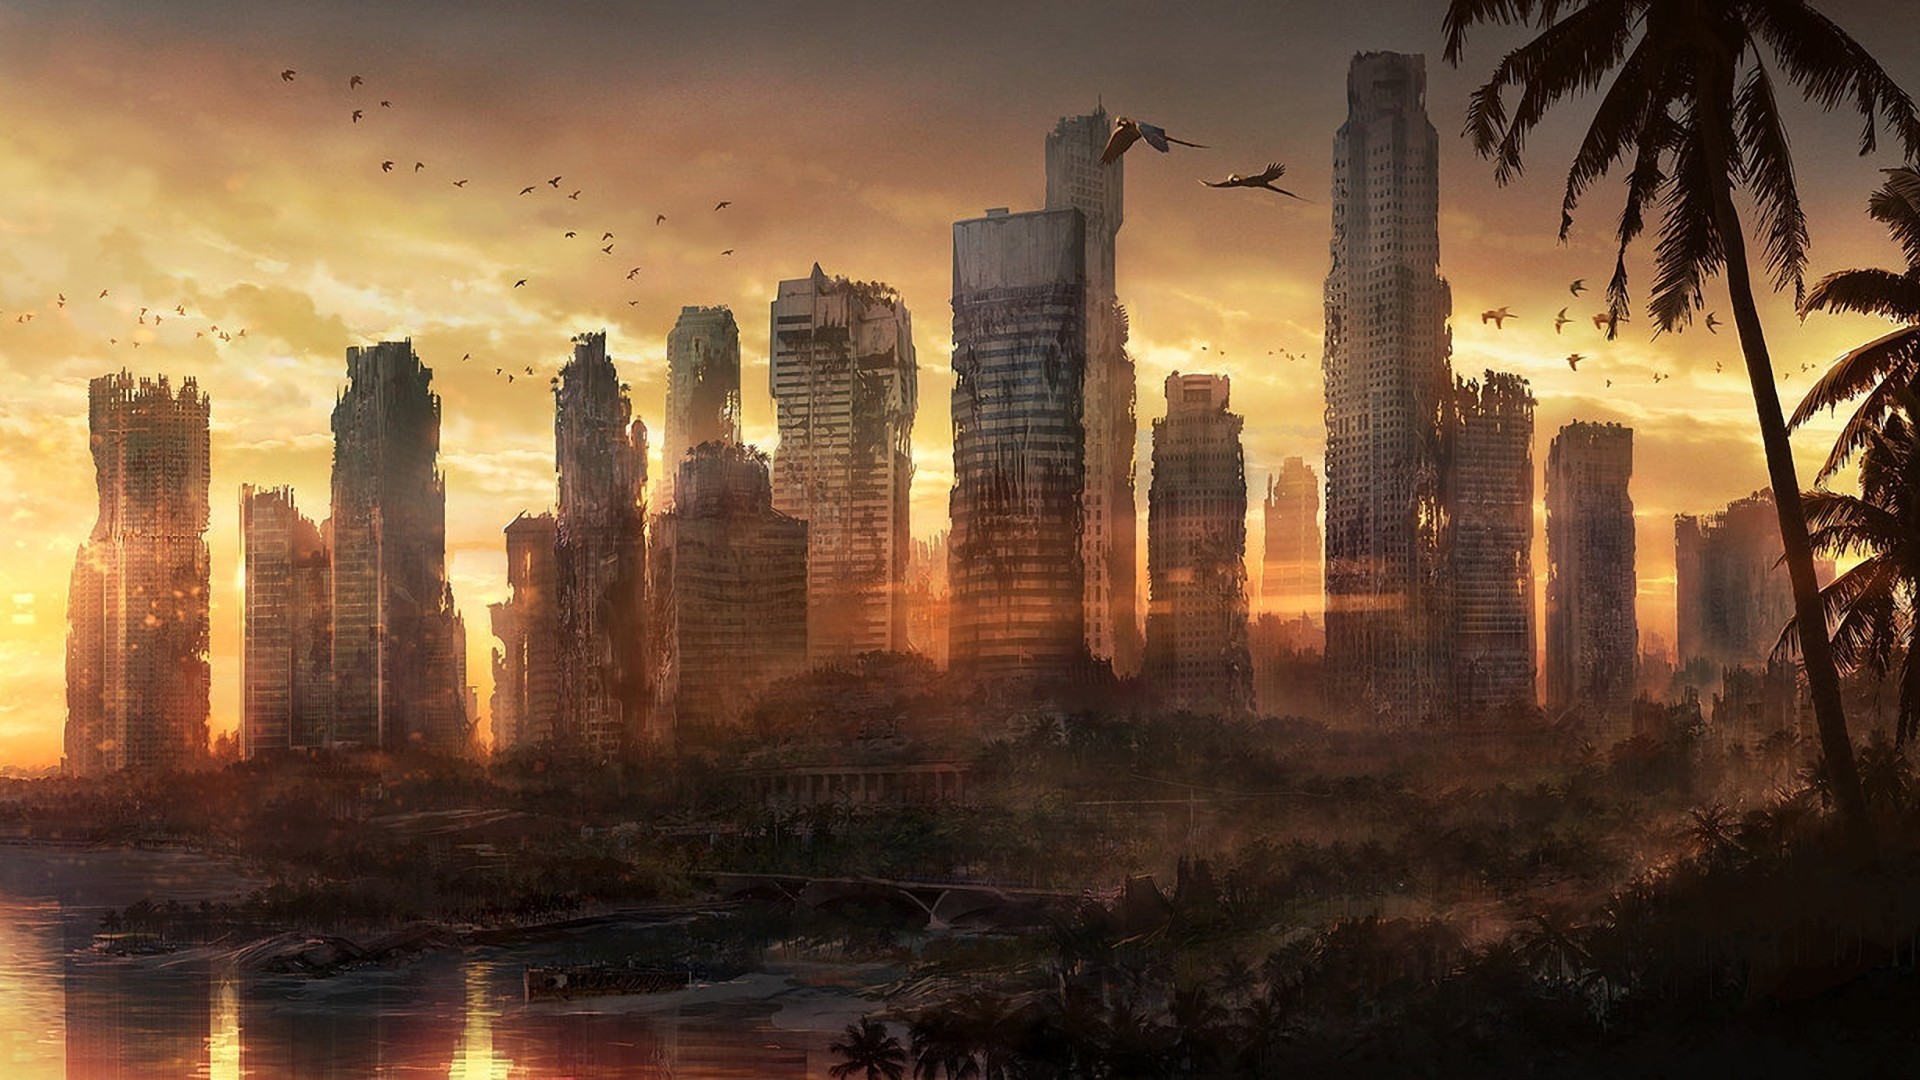 General 1920x1080 cityscape apocalyptic sunset ruins sunlight science fiction futuristic